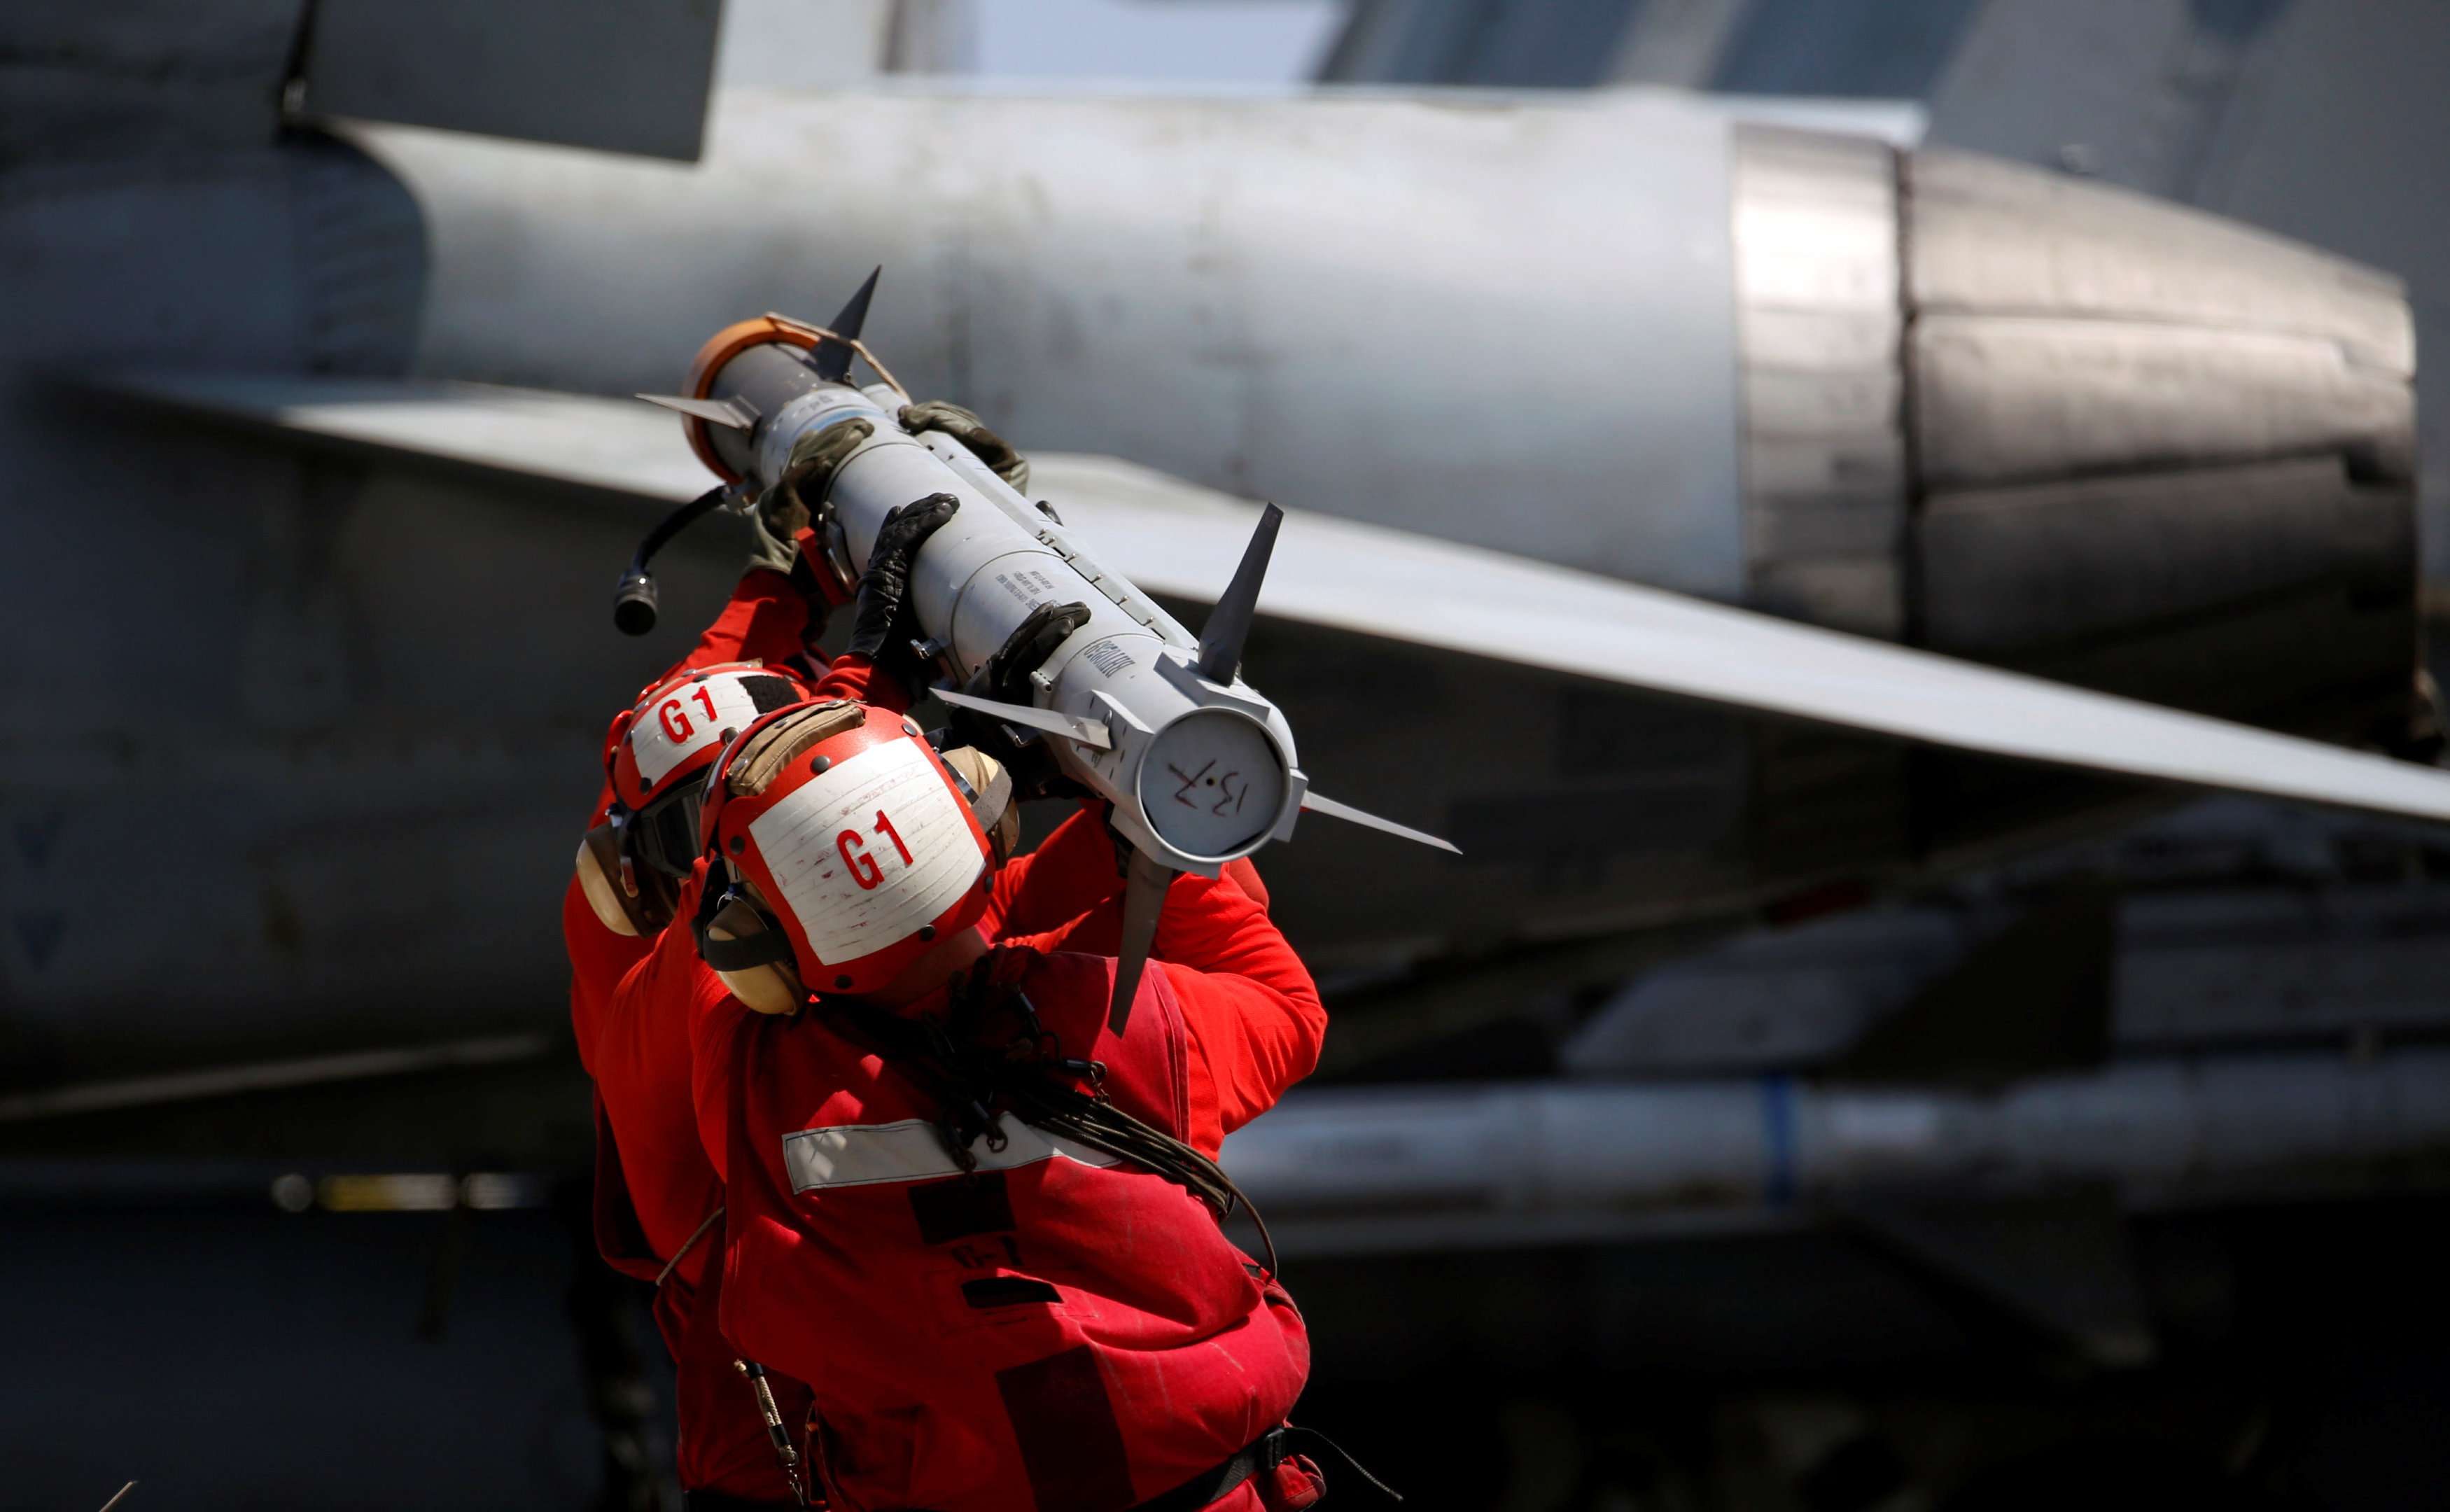 US Navy personnel carry a missile to arm an F-18 fighter jet on the deck of the USS Carl Vinson during a routine exercise in the South China Sea earlier this month. Photo: Reuters